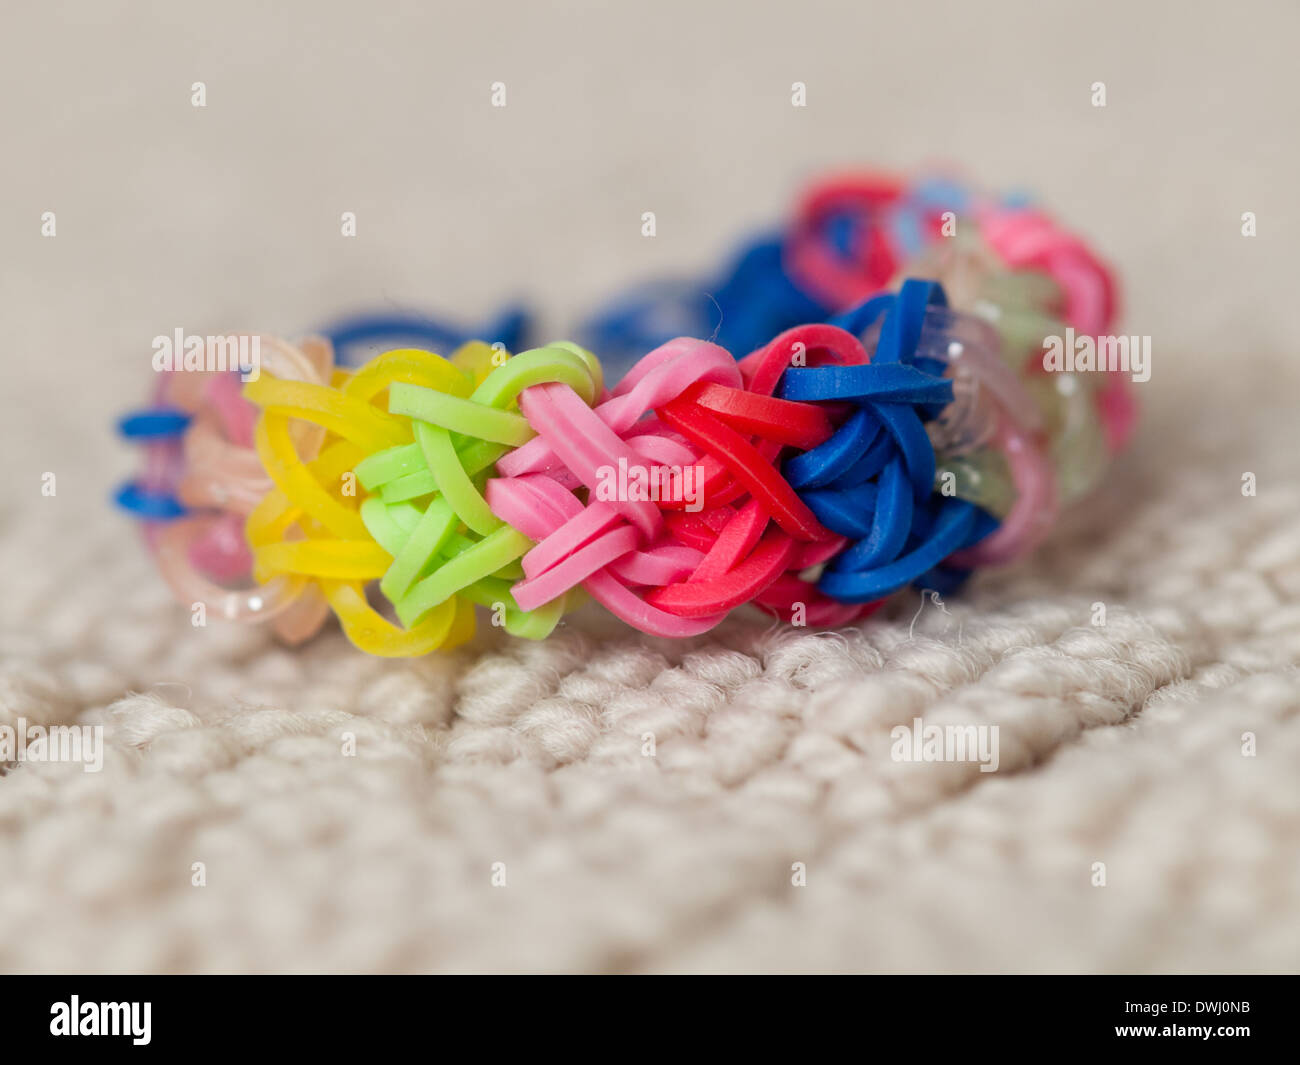 Colorful Loom Bracelet Rubber Bands Isolated On White Background Stock  Photo, Picture and Royalty Free Image. Image 37819161.